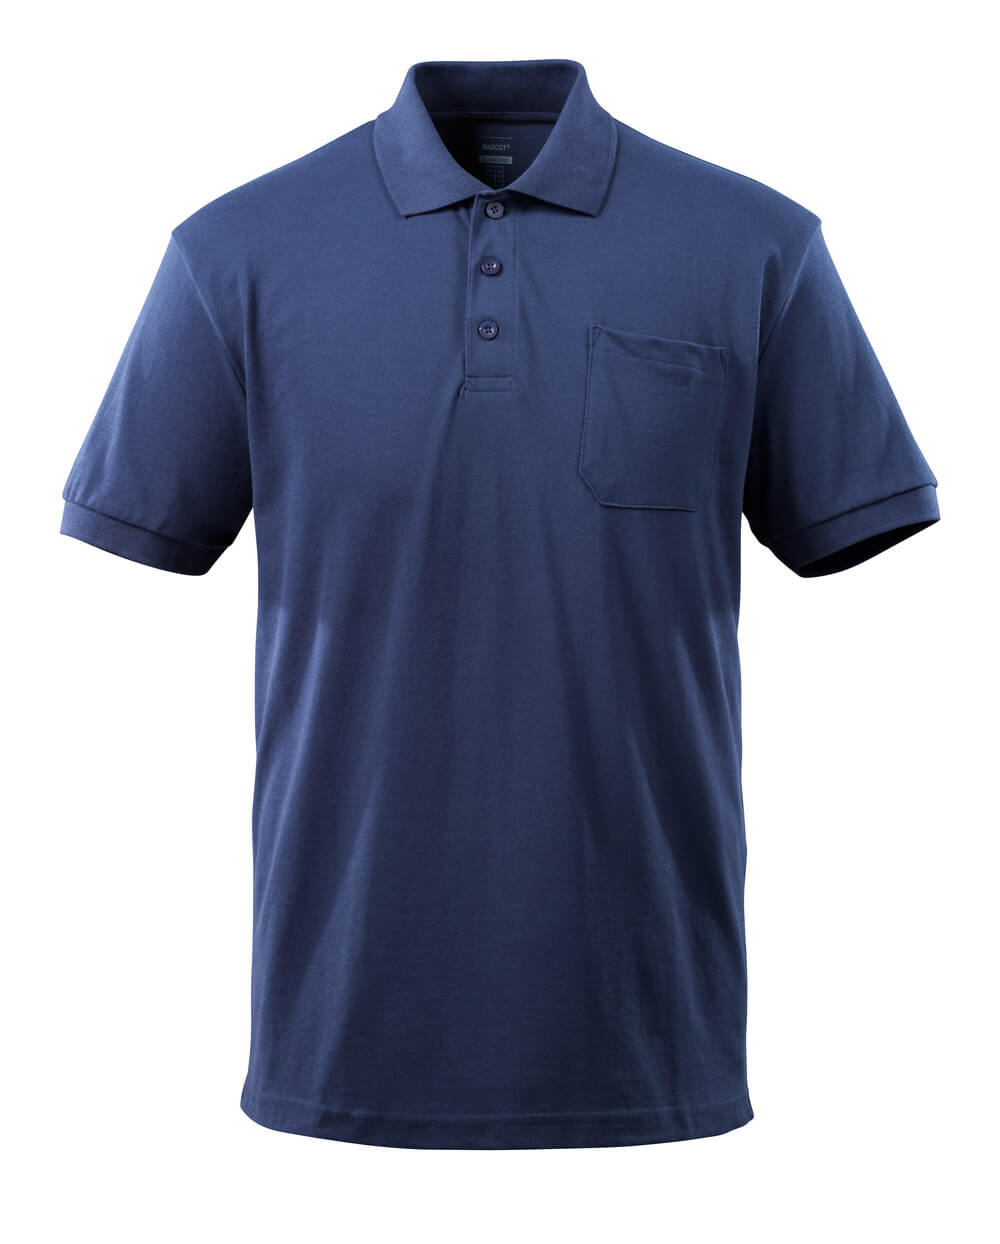 Mascot CROSSOVER  Orgon Polo Shirt with chest pocket 51586 navy